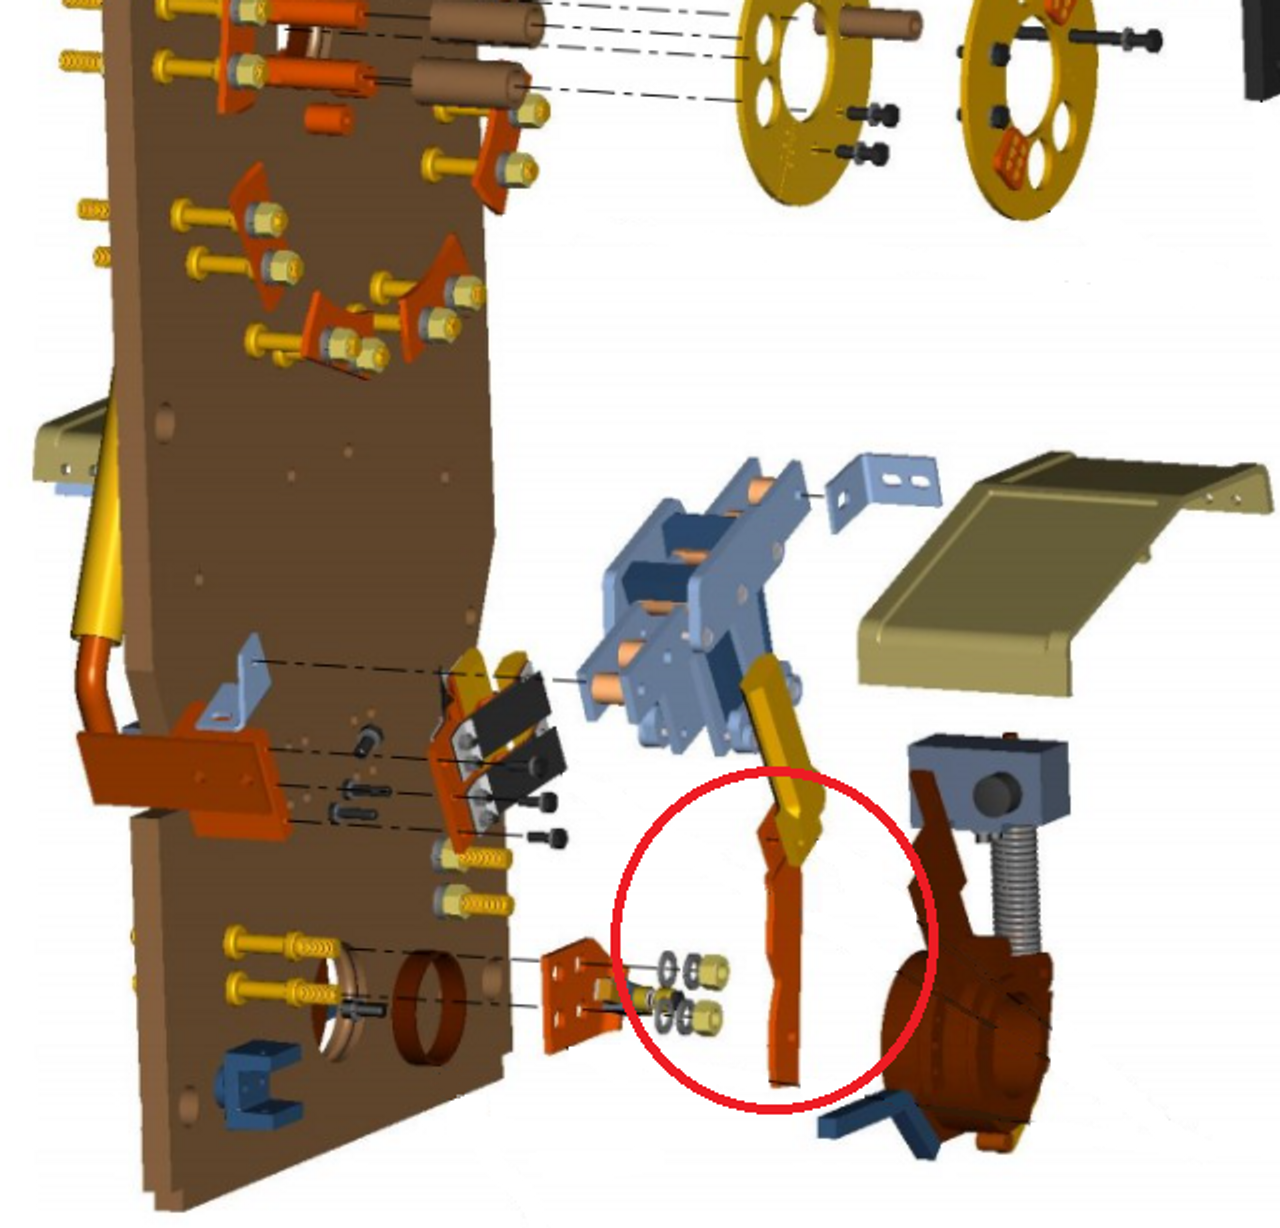 Part circled in 3D model of assembly